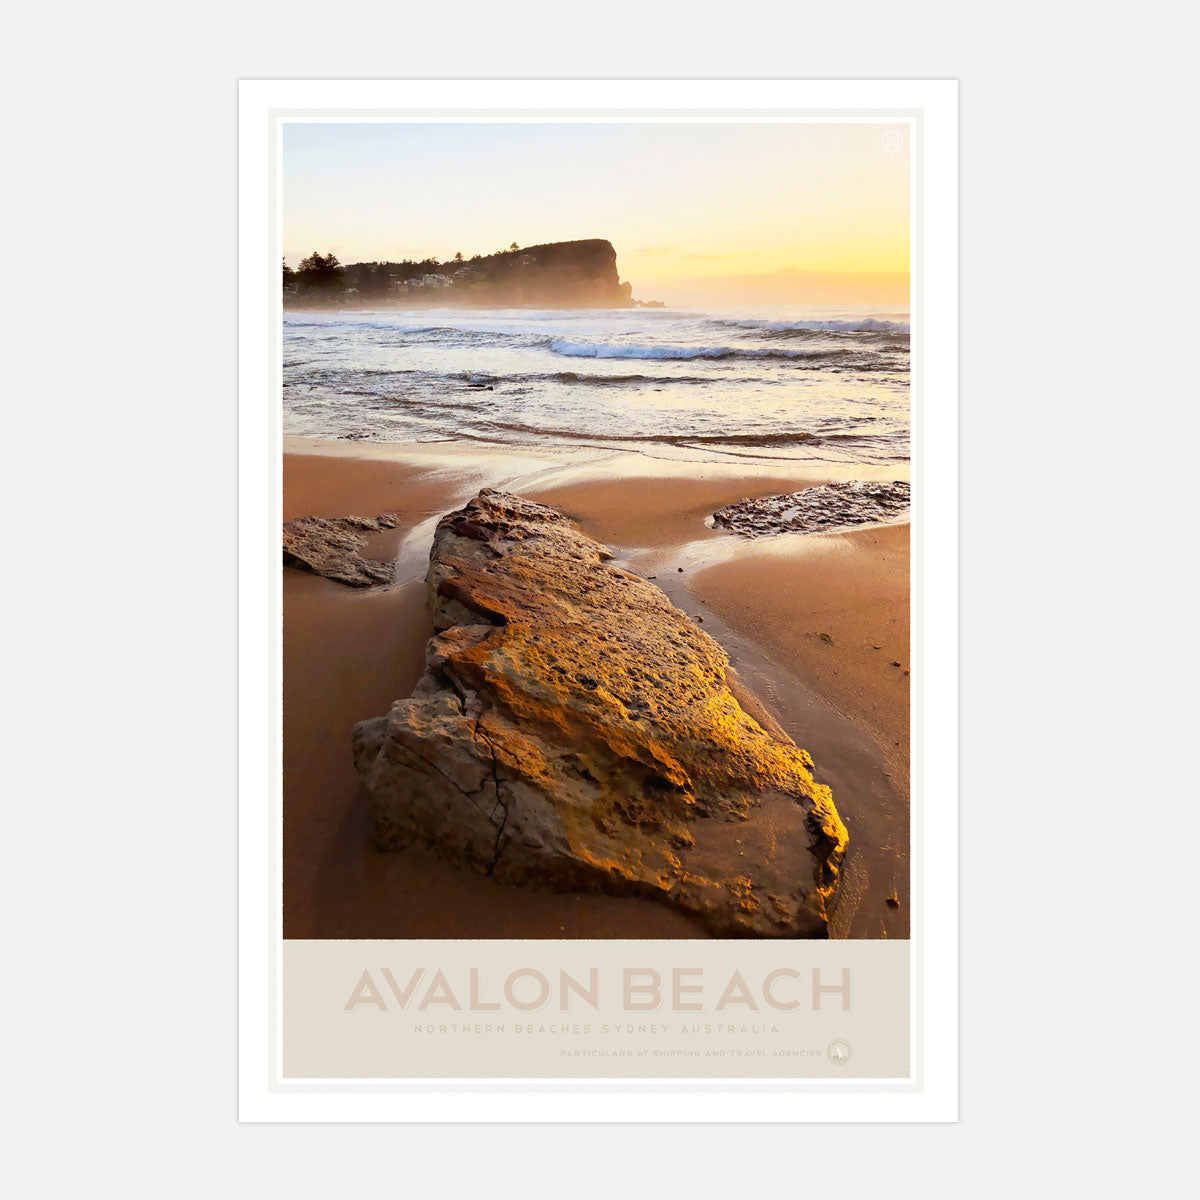 Avalon Beach vintage retro print from Places we Luv